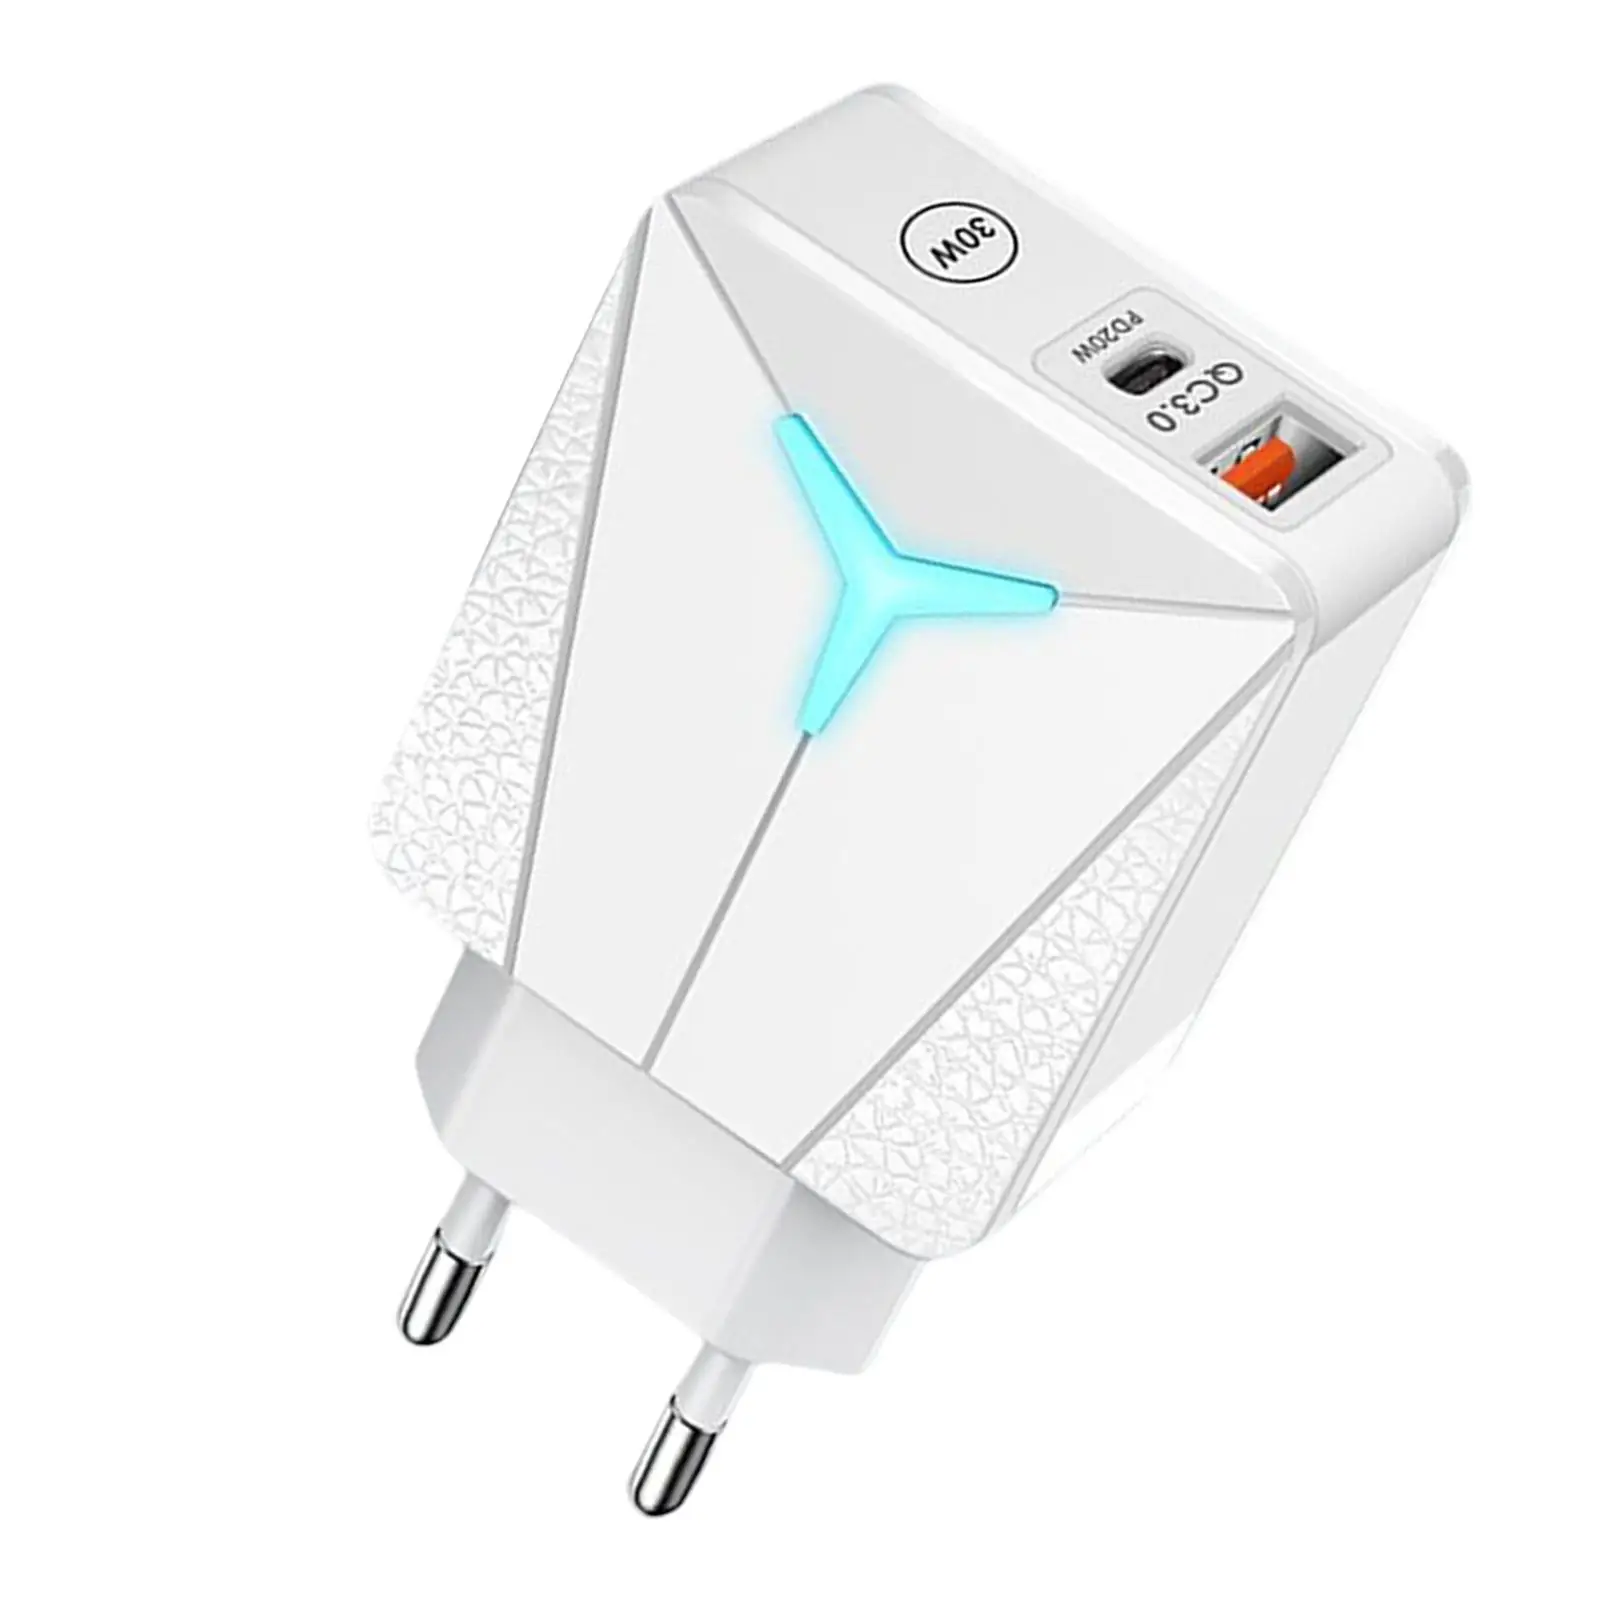 Phone Charger Plug fast Charging 5V / 4A 9V / 2.4A 12V / 1.8A PD 20W QC3.0 USB Converter Wall Charger for Home Use Travel